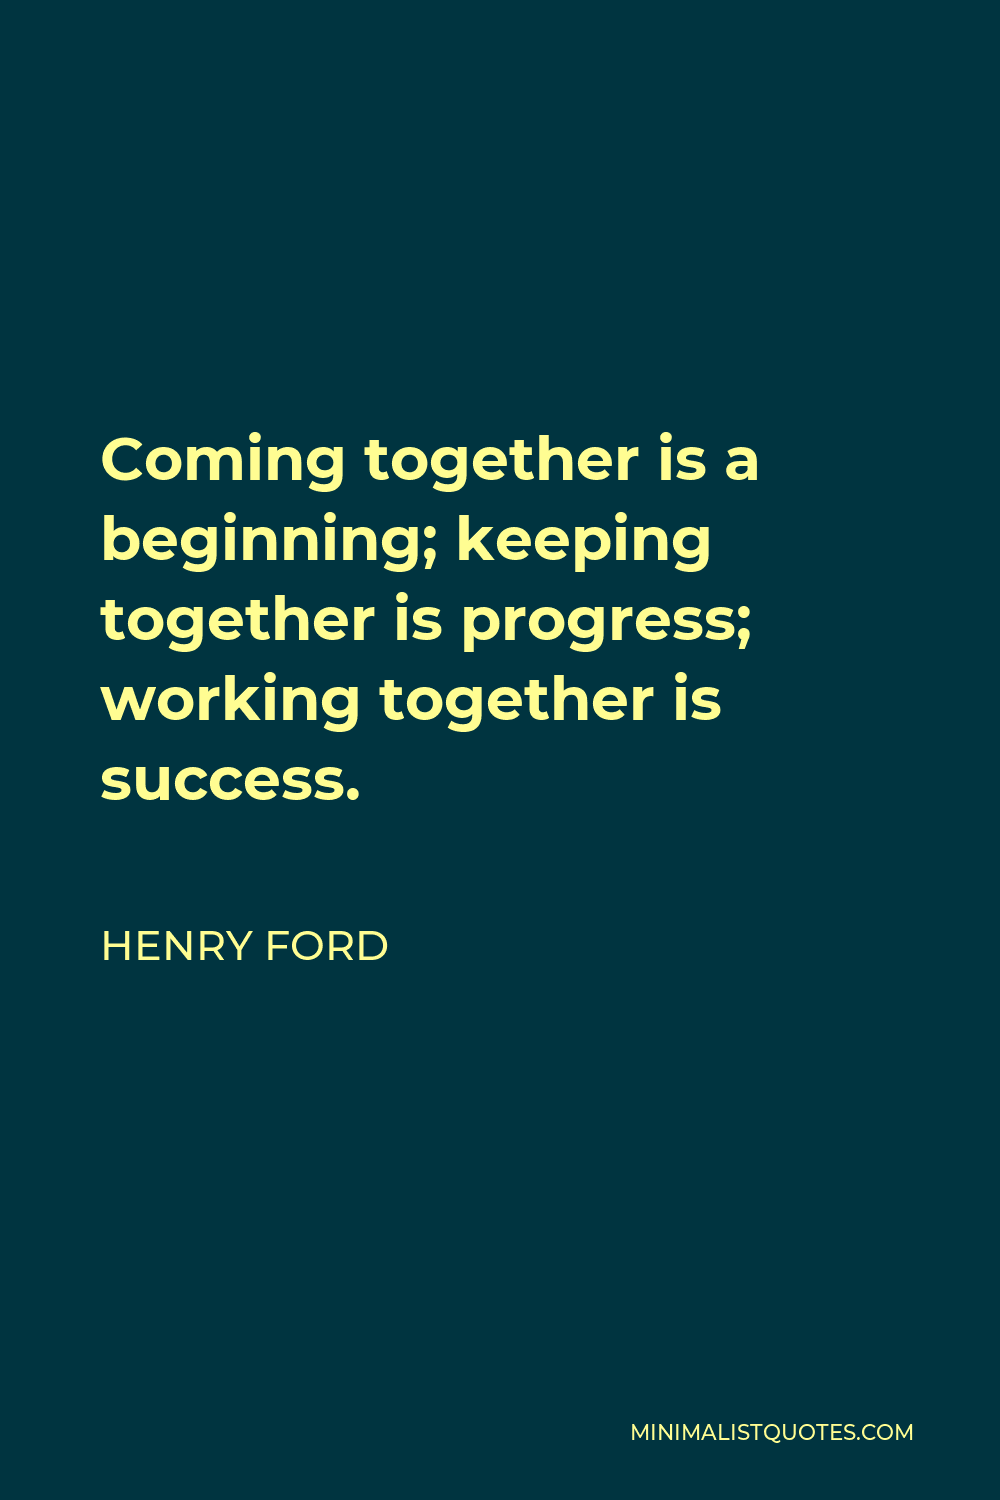 mondaymotivation Coming together is a beginning. Keeping together is  progress. Working together is success.” — Henry…